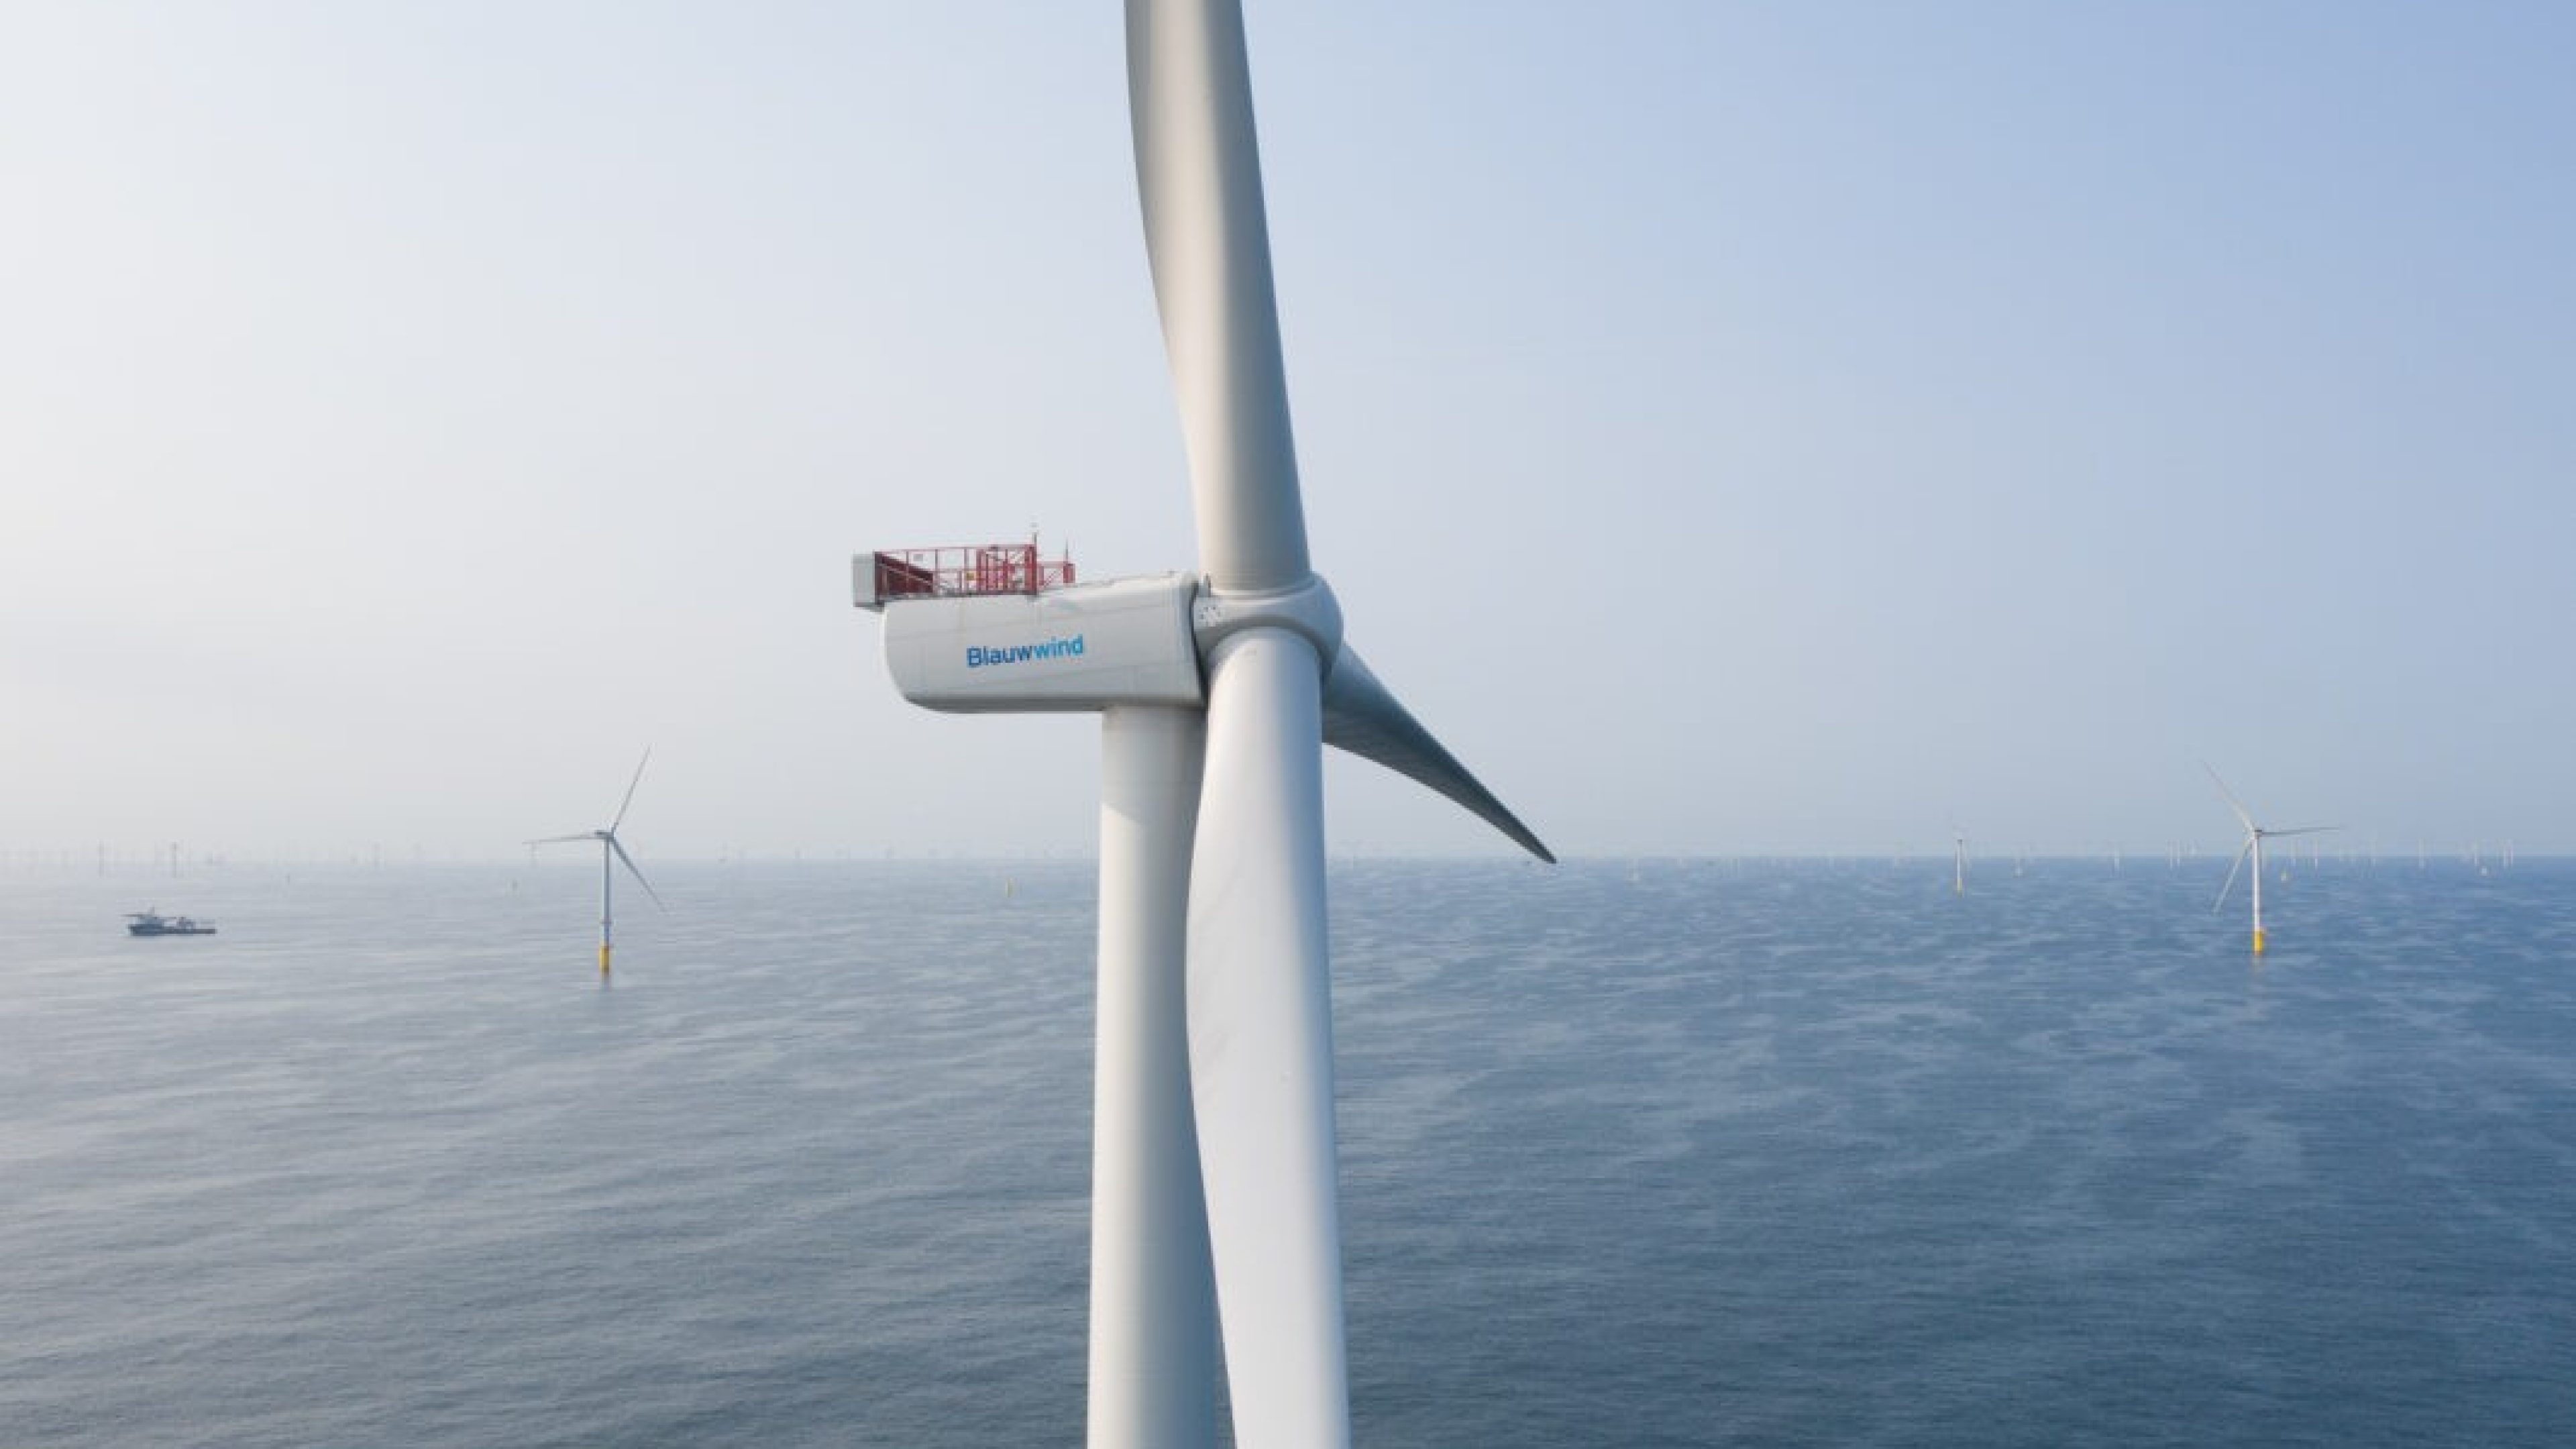 Offshore wind farm surrounded by sea